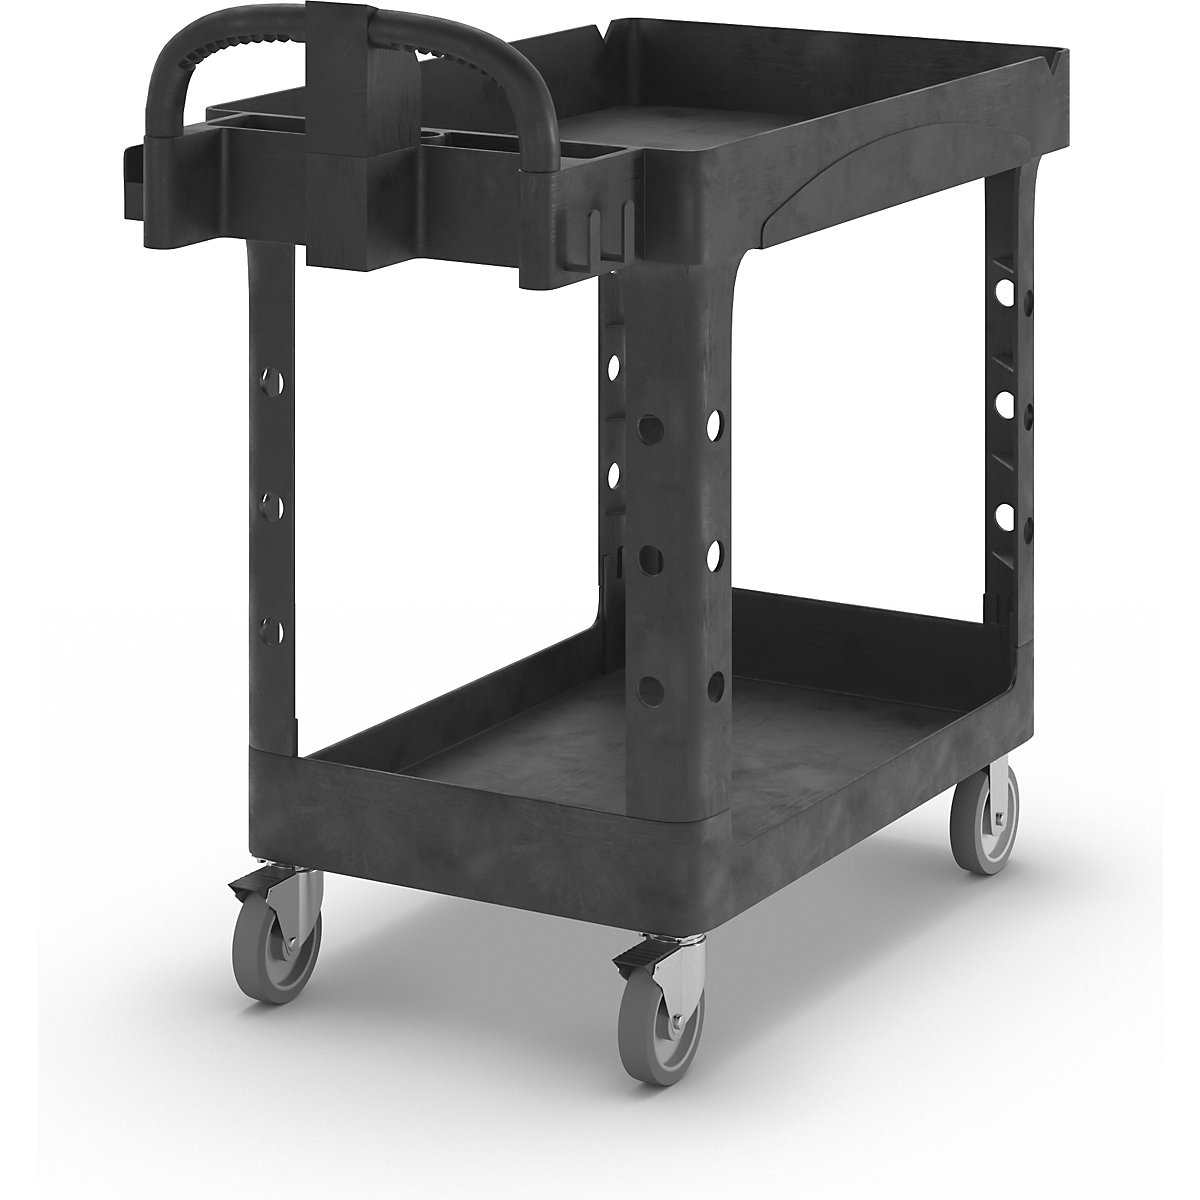 General purpose table trolley made of plastic – Rubbermaid, shelves with raised edges, LxWxH 975 x 432 x 832 mm-1